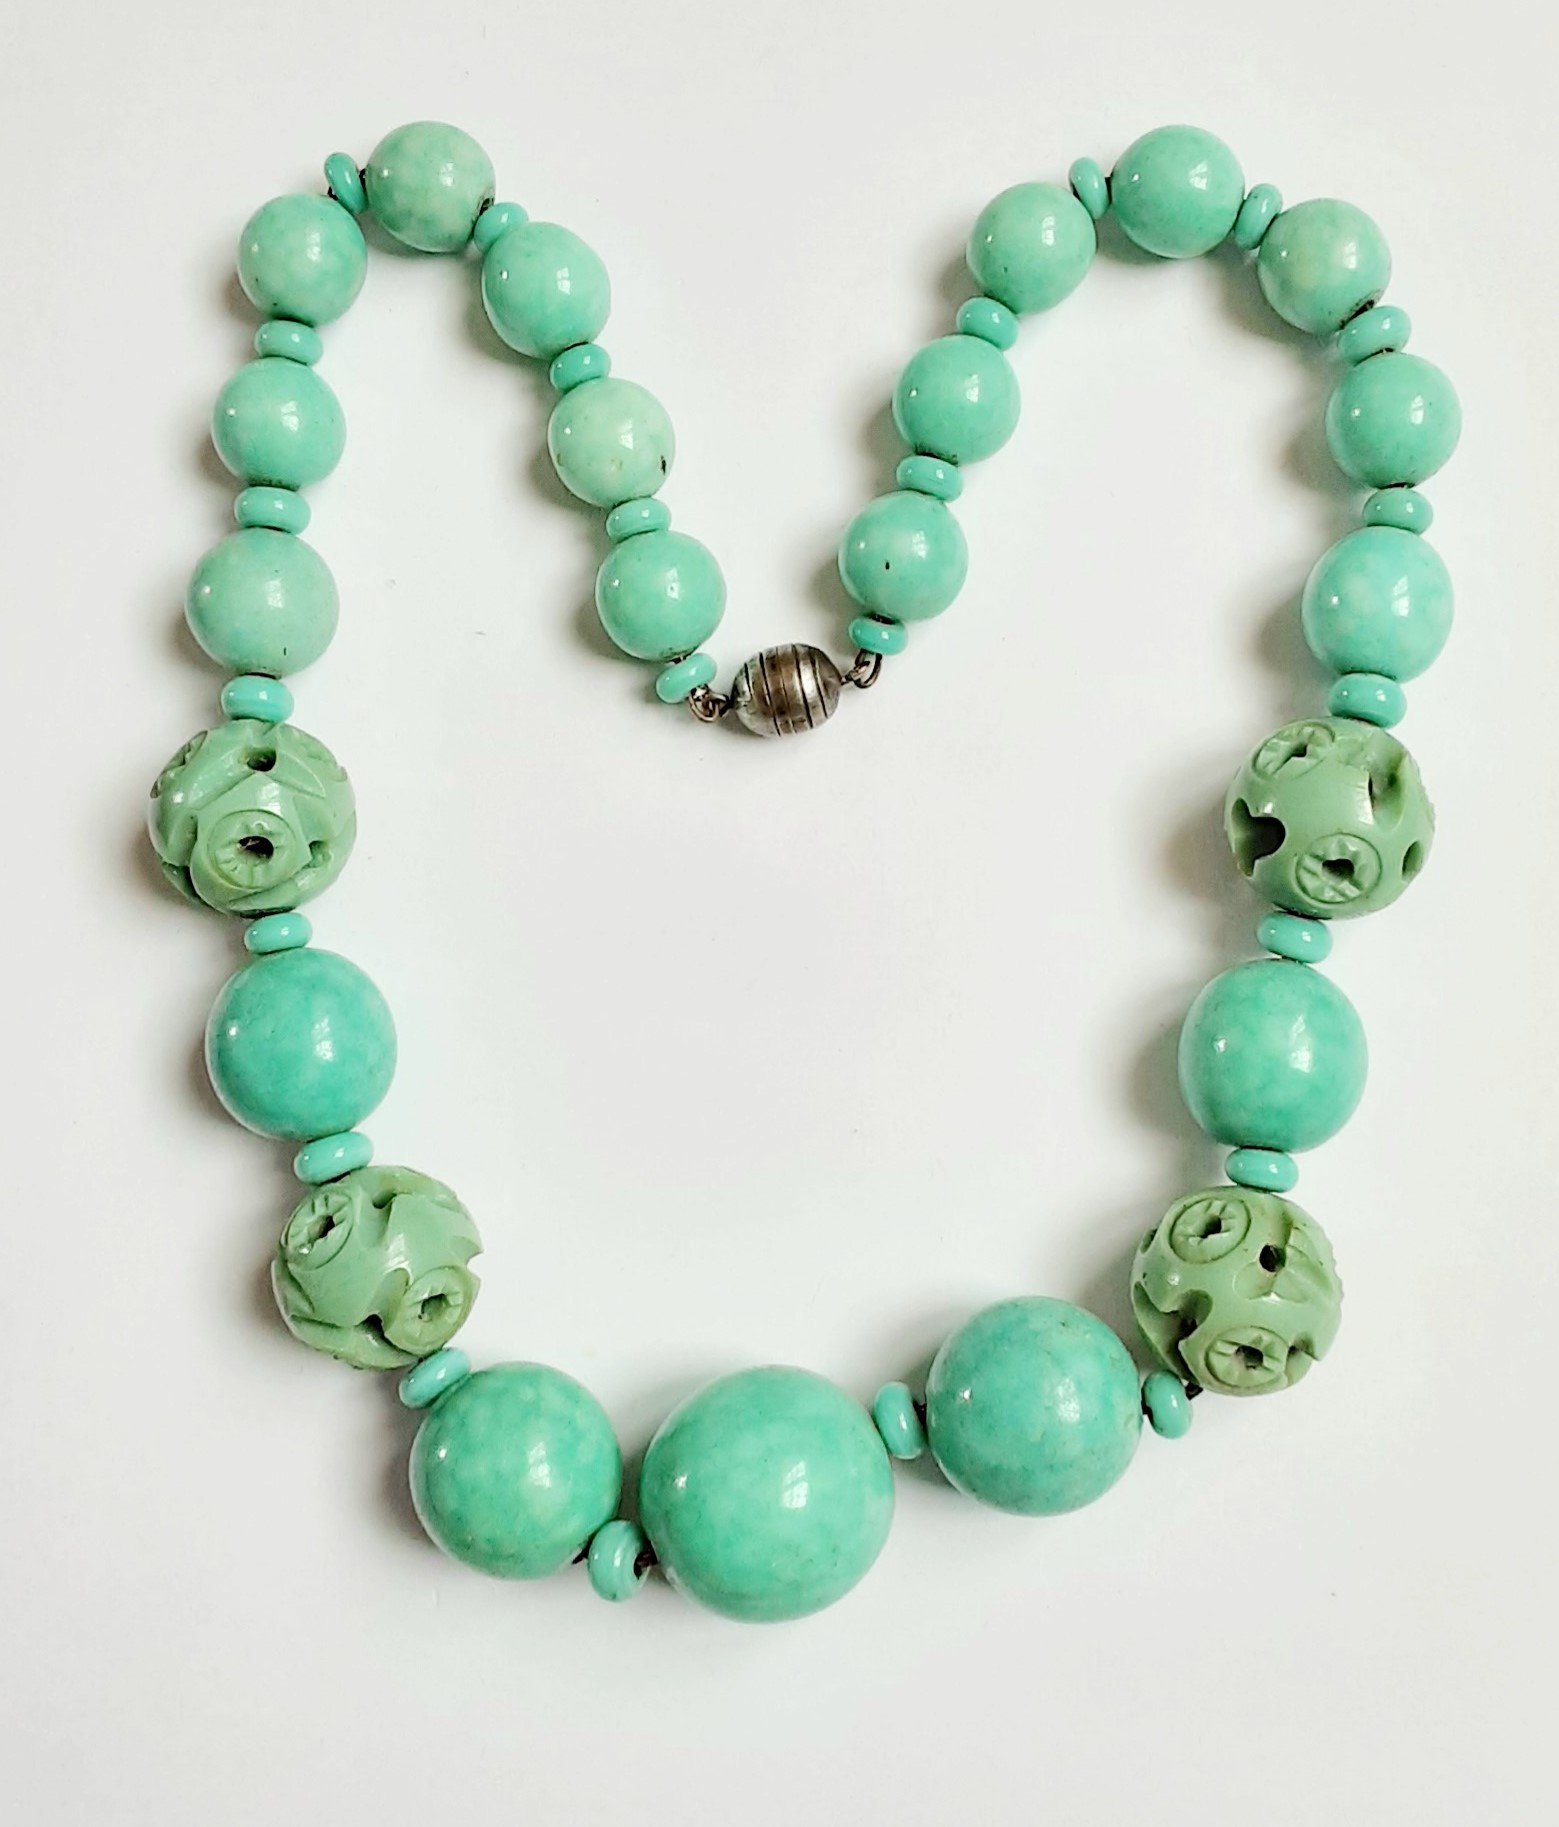 Deco French beads necklace